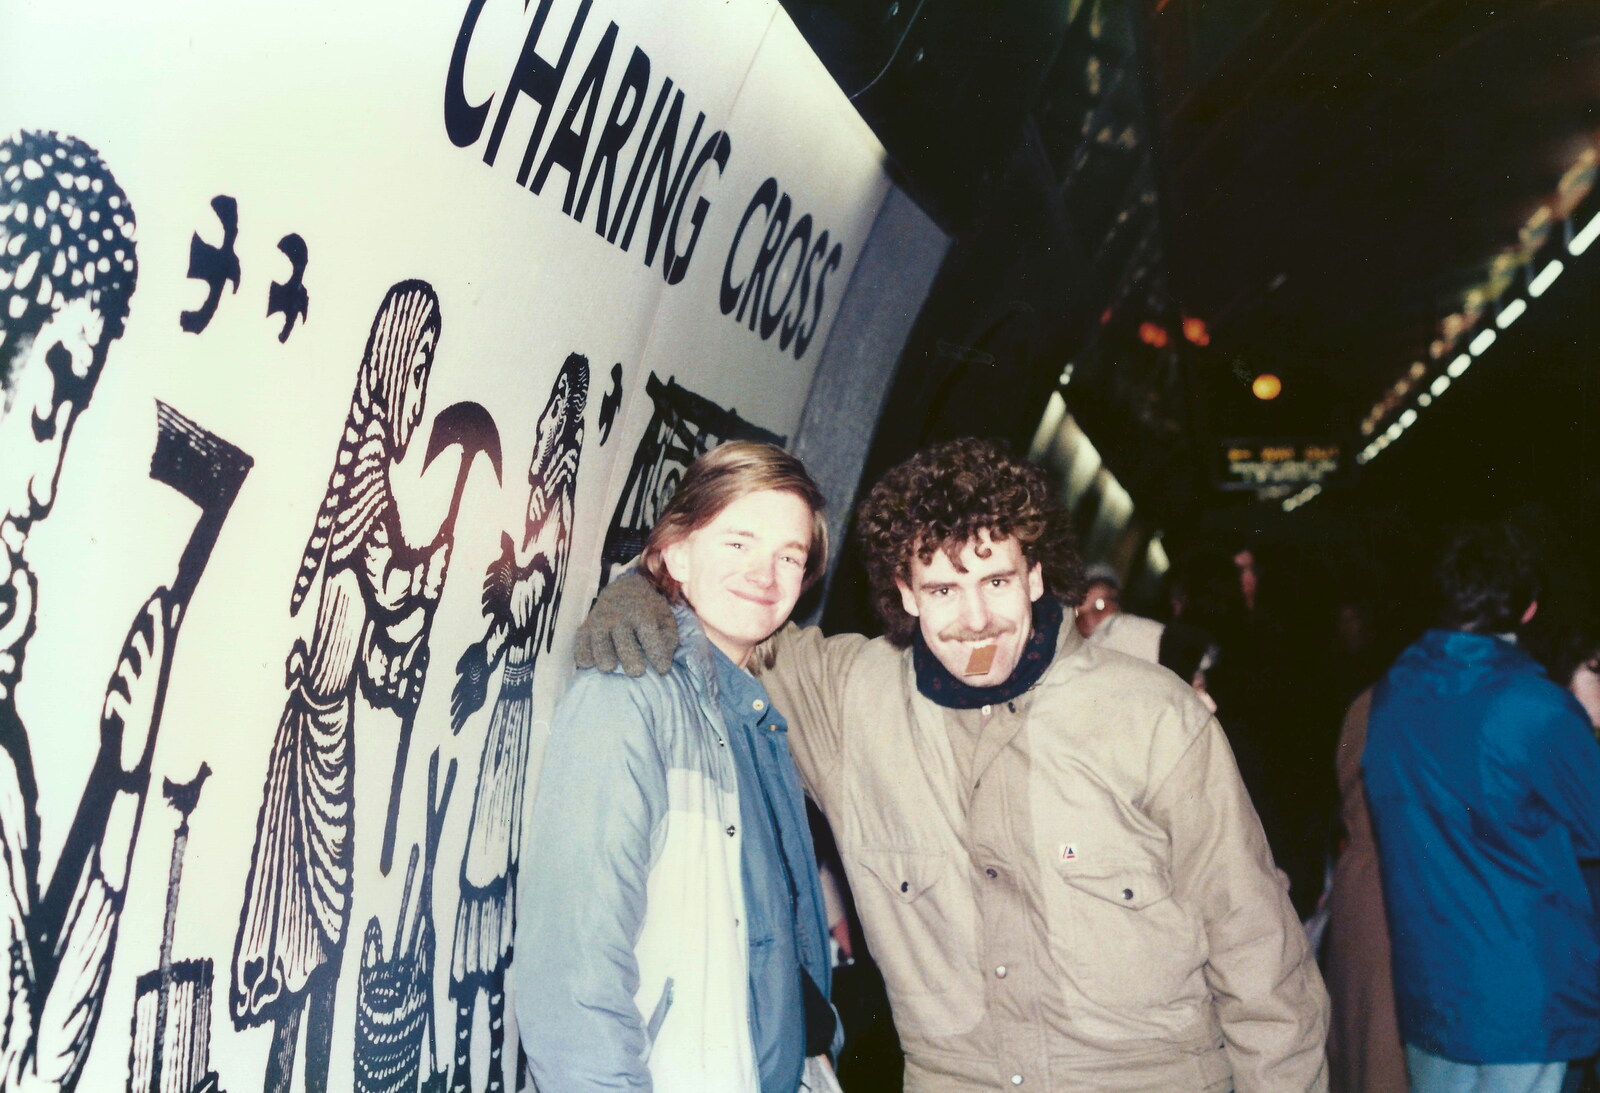 Nosher and Sam at Charing Cross underground from Uni: No Chance Fowler! A student Demonstration, London - 26th February 1986